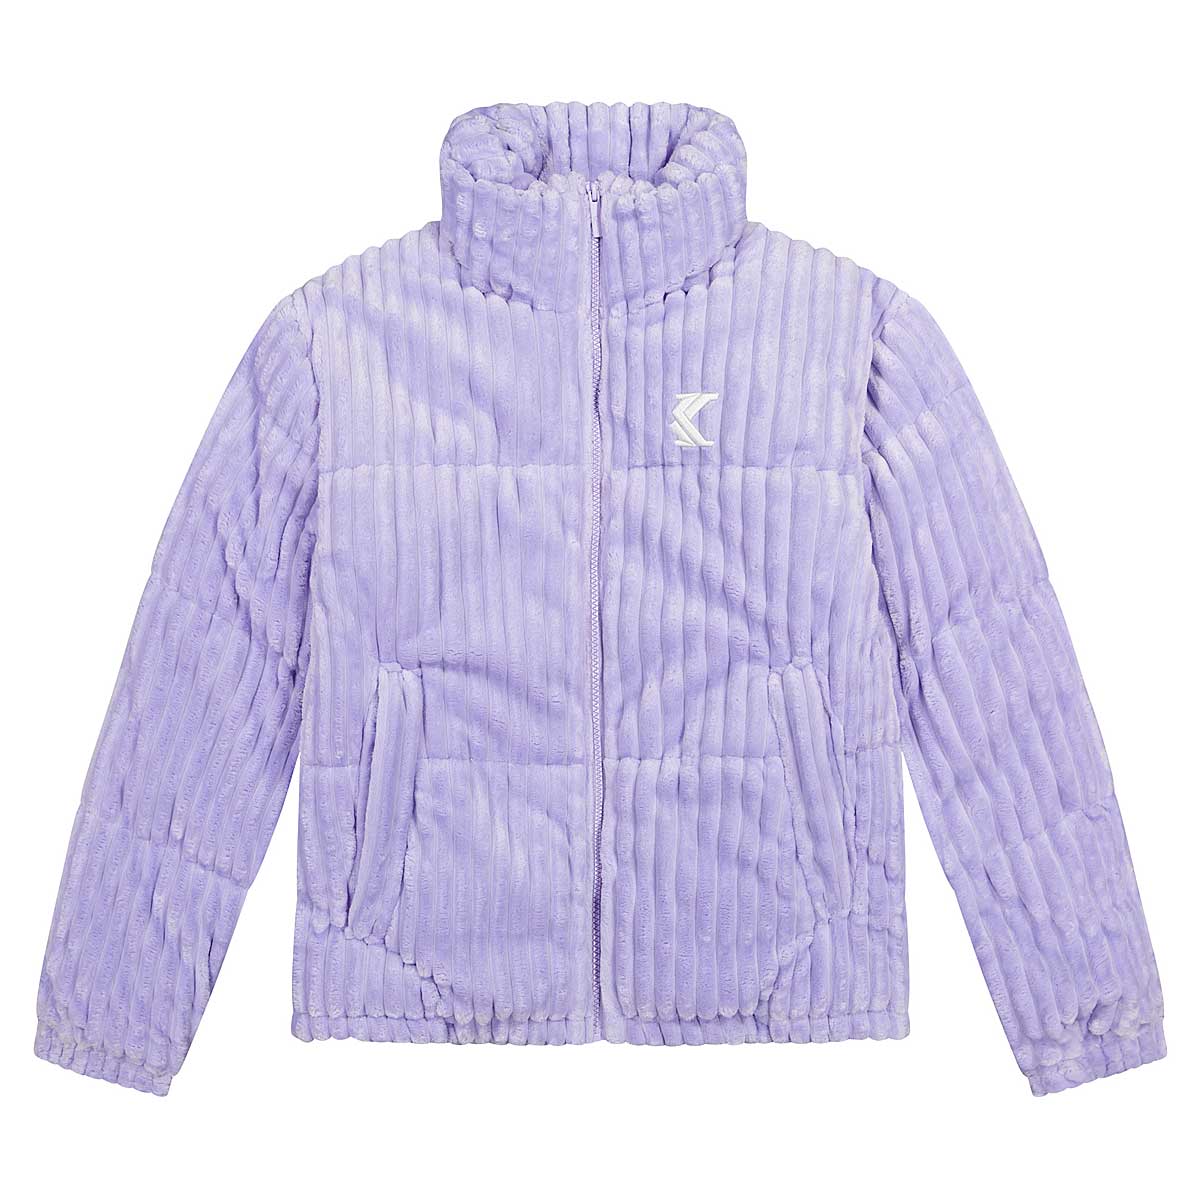 Fuzzy Buy on WOMENS Jacket Puffer OG N/A for Corduroy 0.0